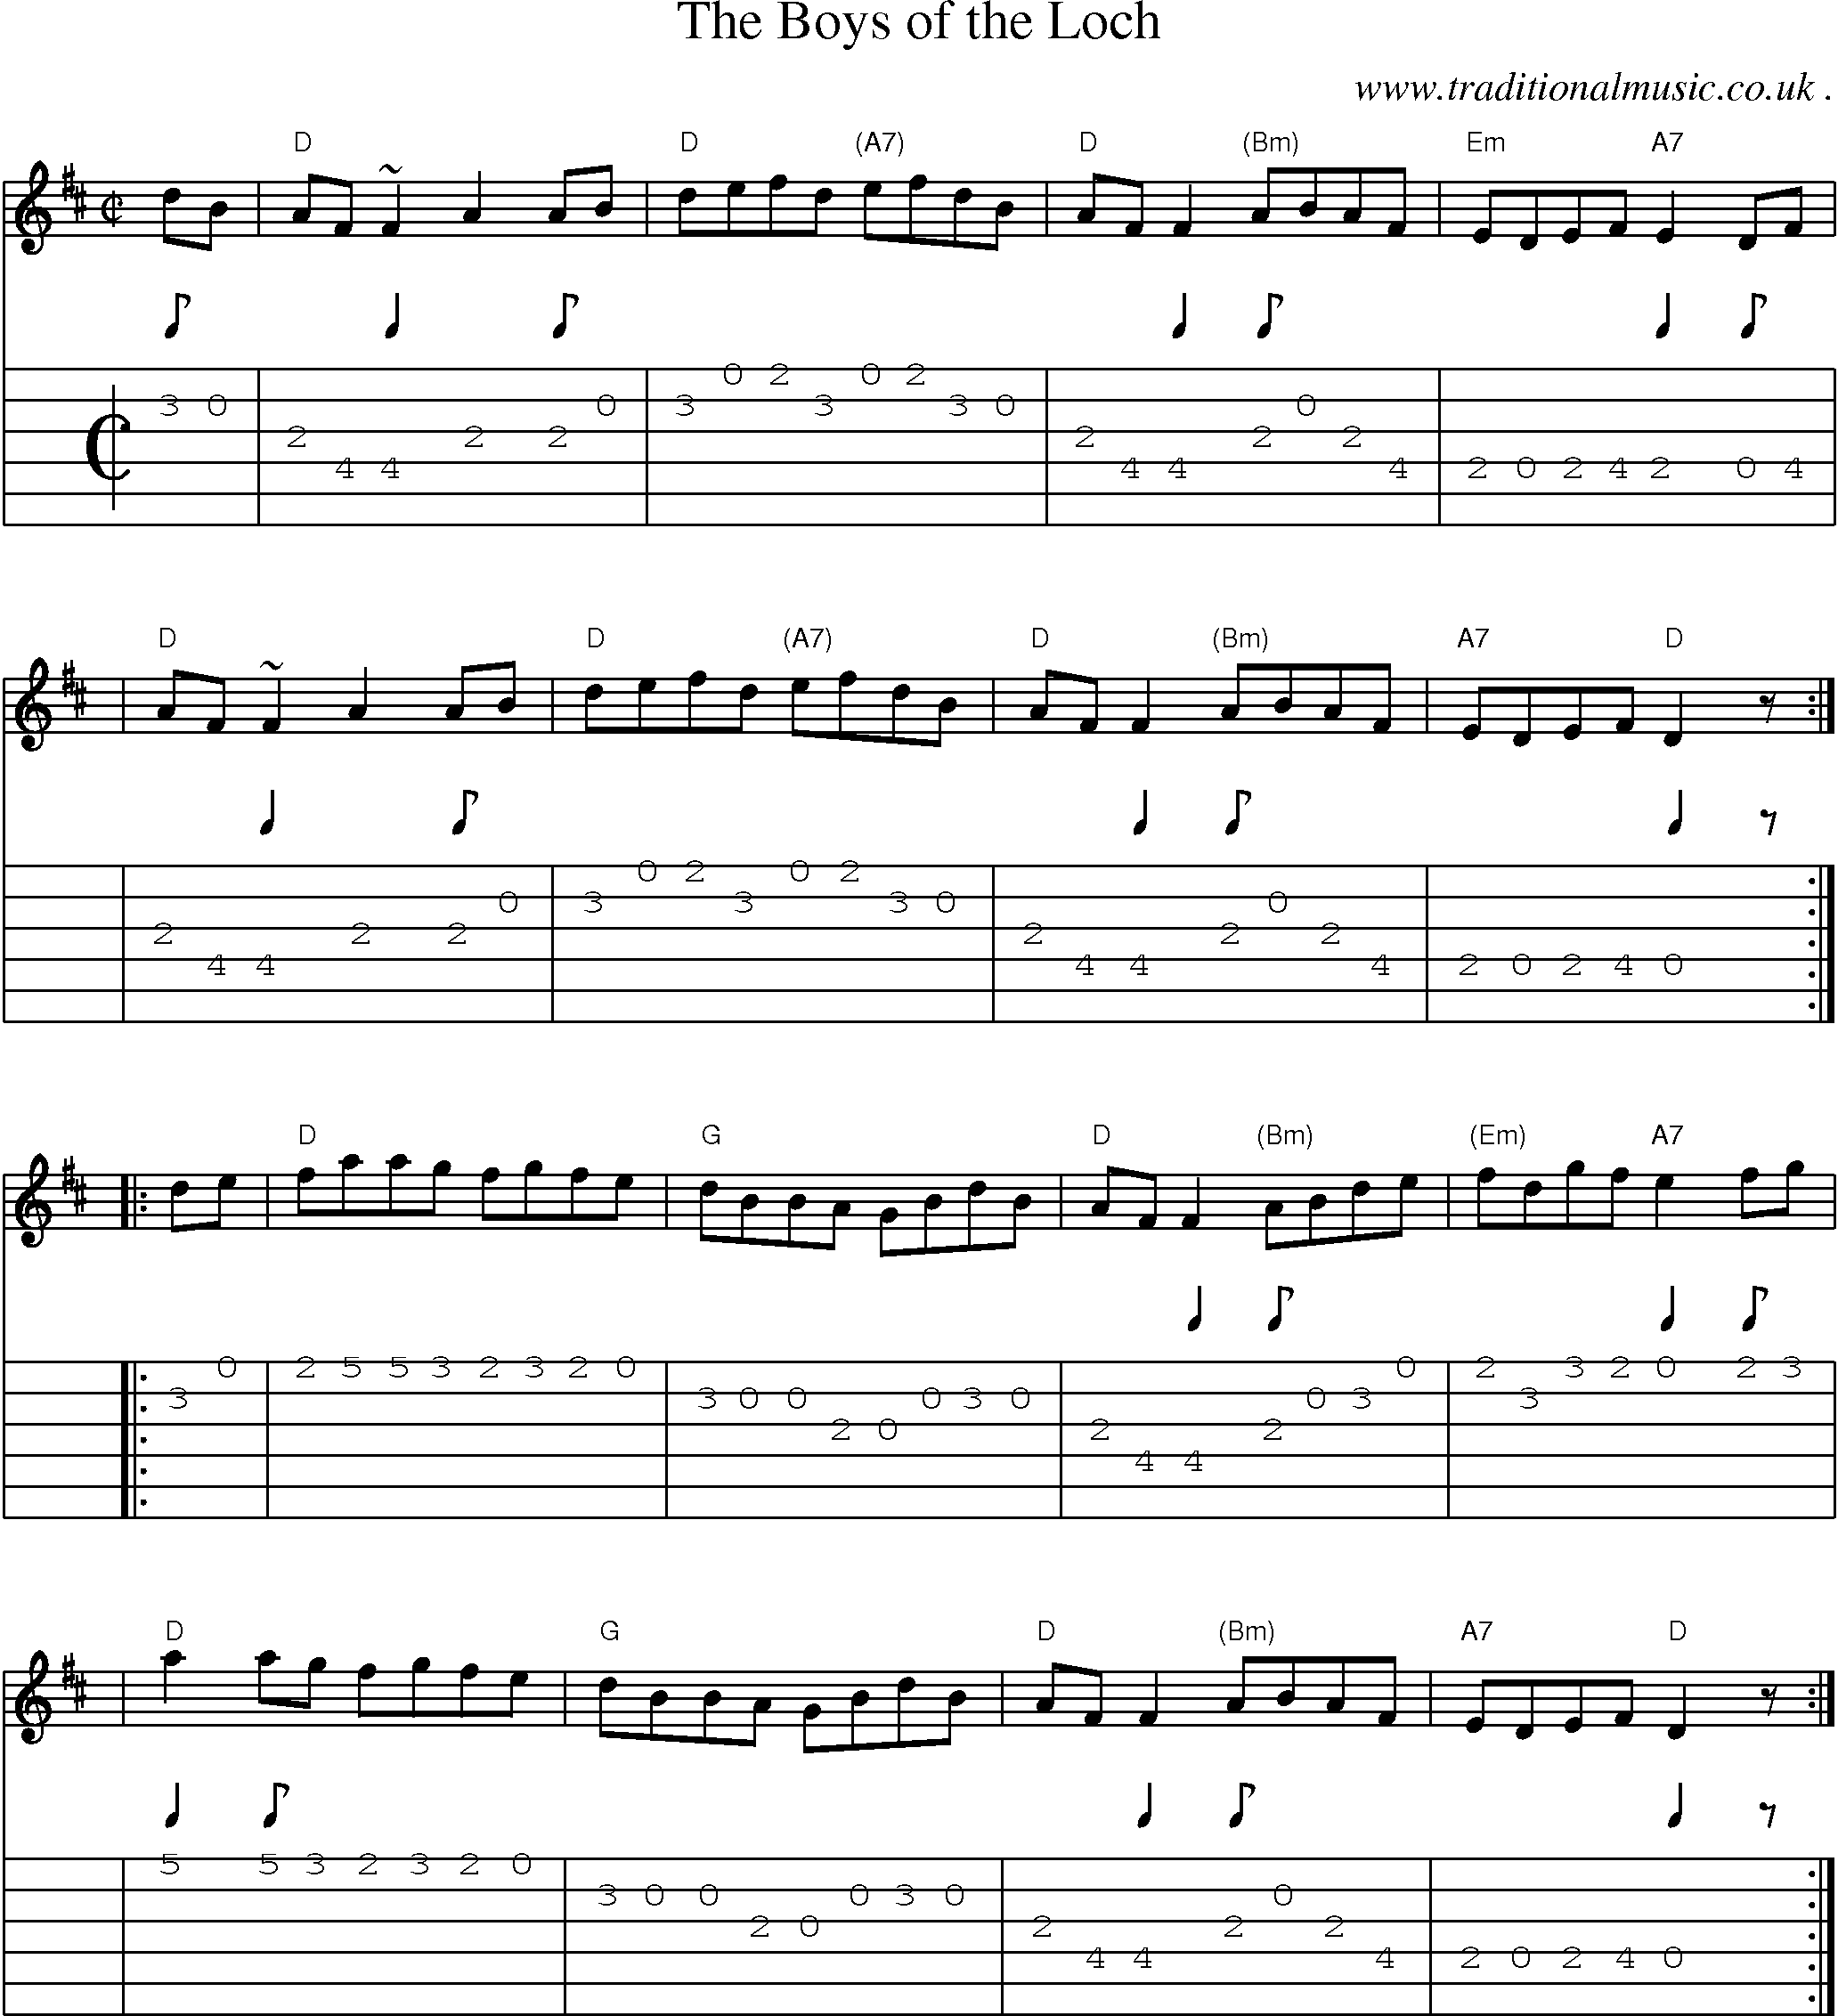 Sheet-music  score, Chords and Guitar Tabs for The Boys Of The Loch